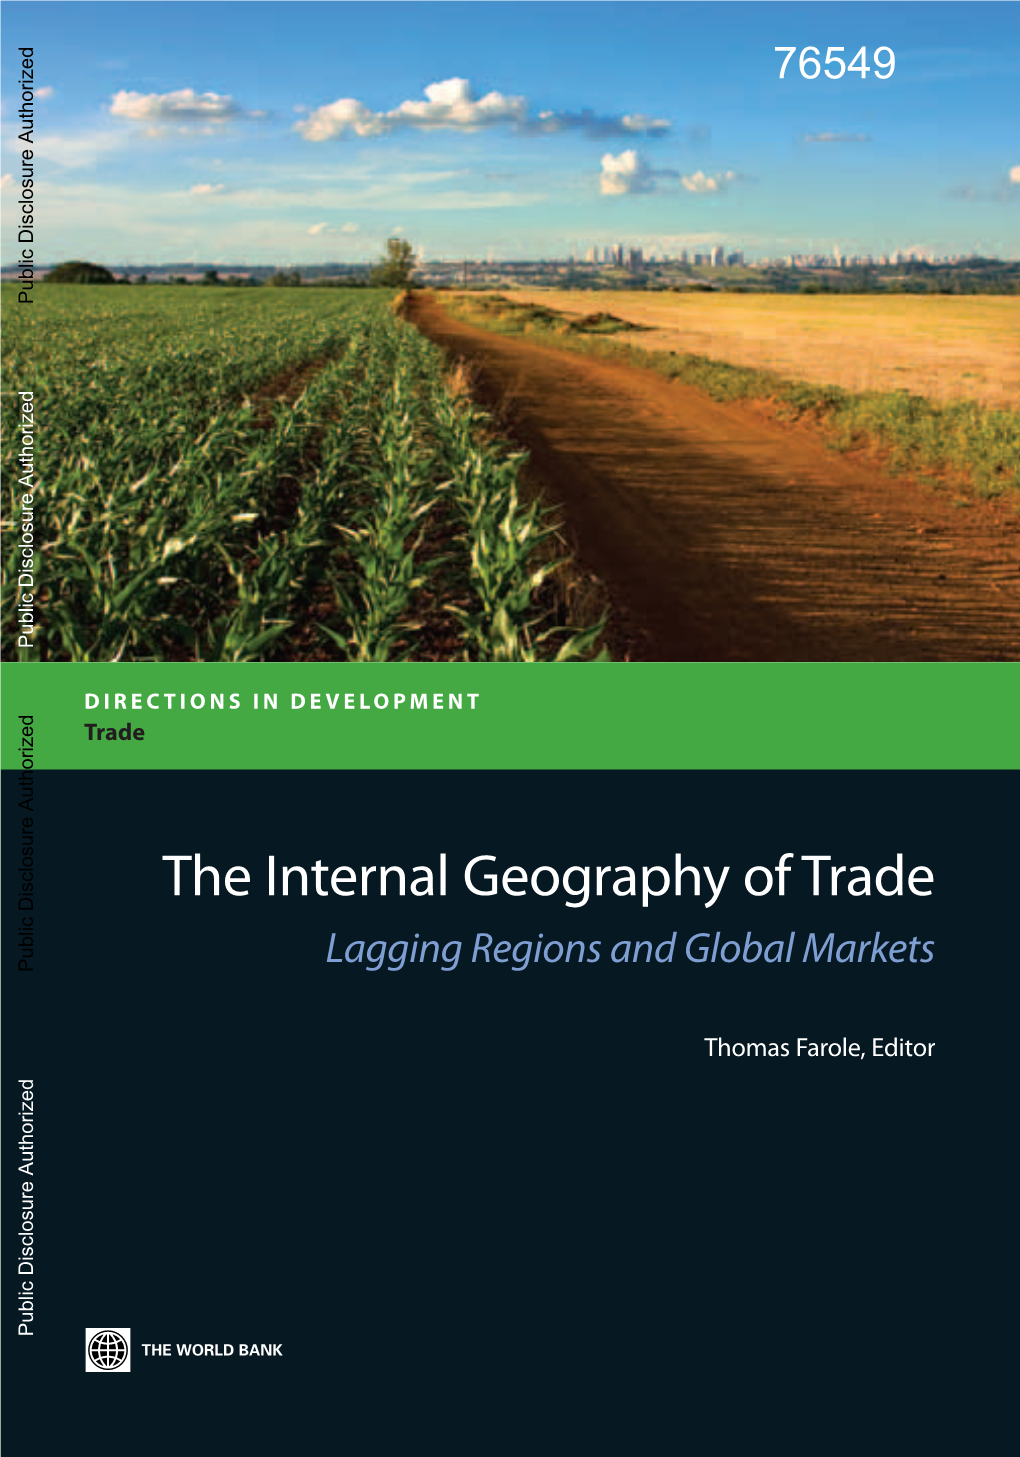 Overall Trade Openness and Regional Inequality: Empirical Evidence 37 Model and Data 44 the Impact of Trade Openness on Regional Inequality 50 Conclusions 57